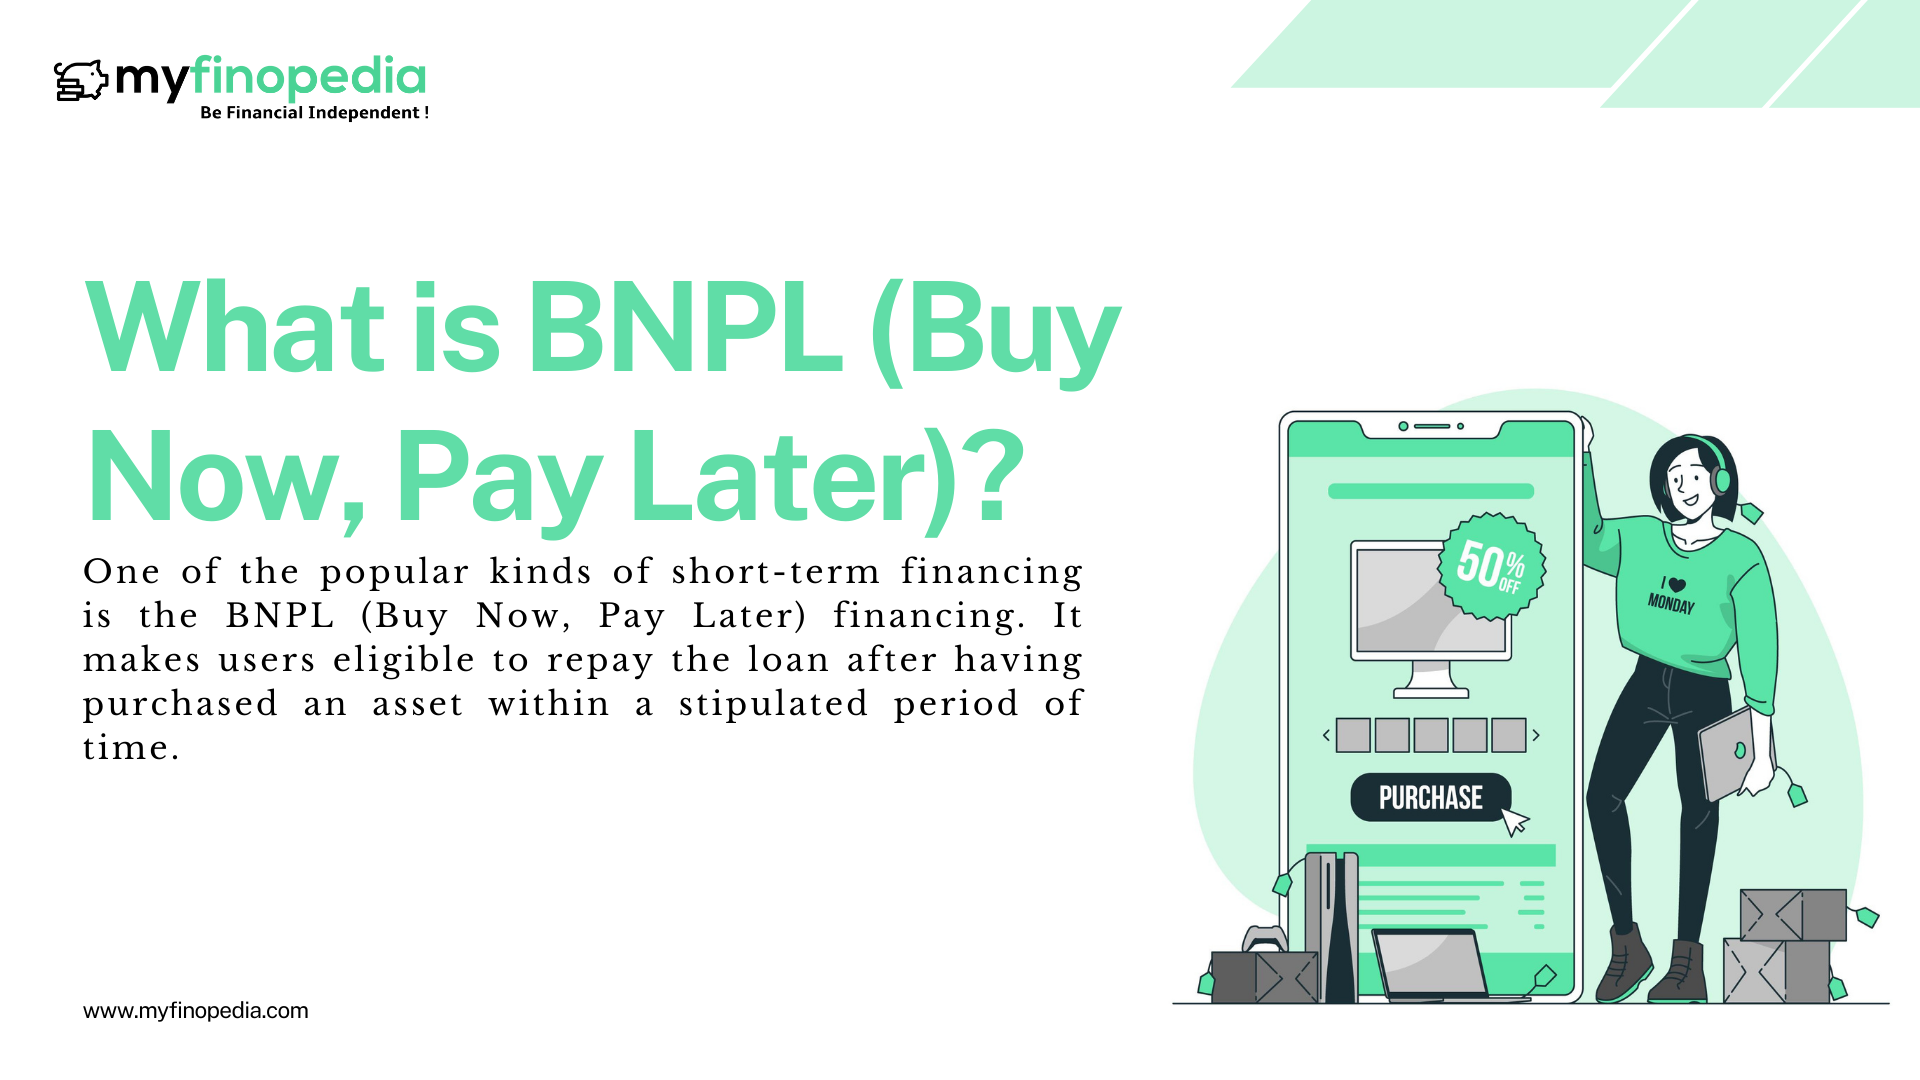 What is BNPL